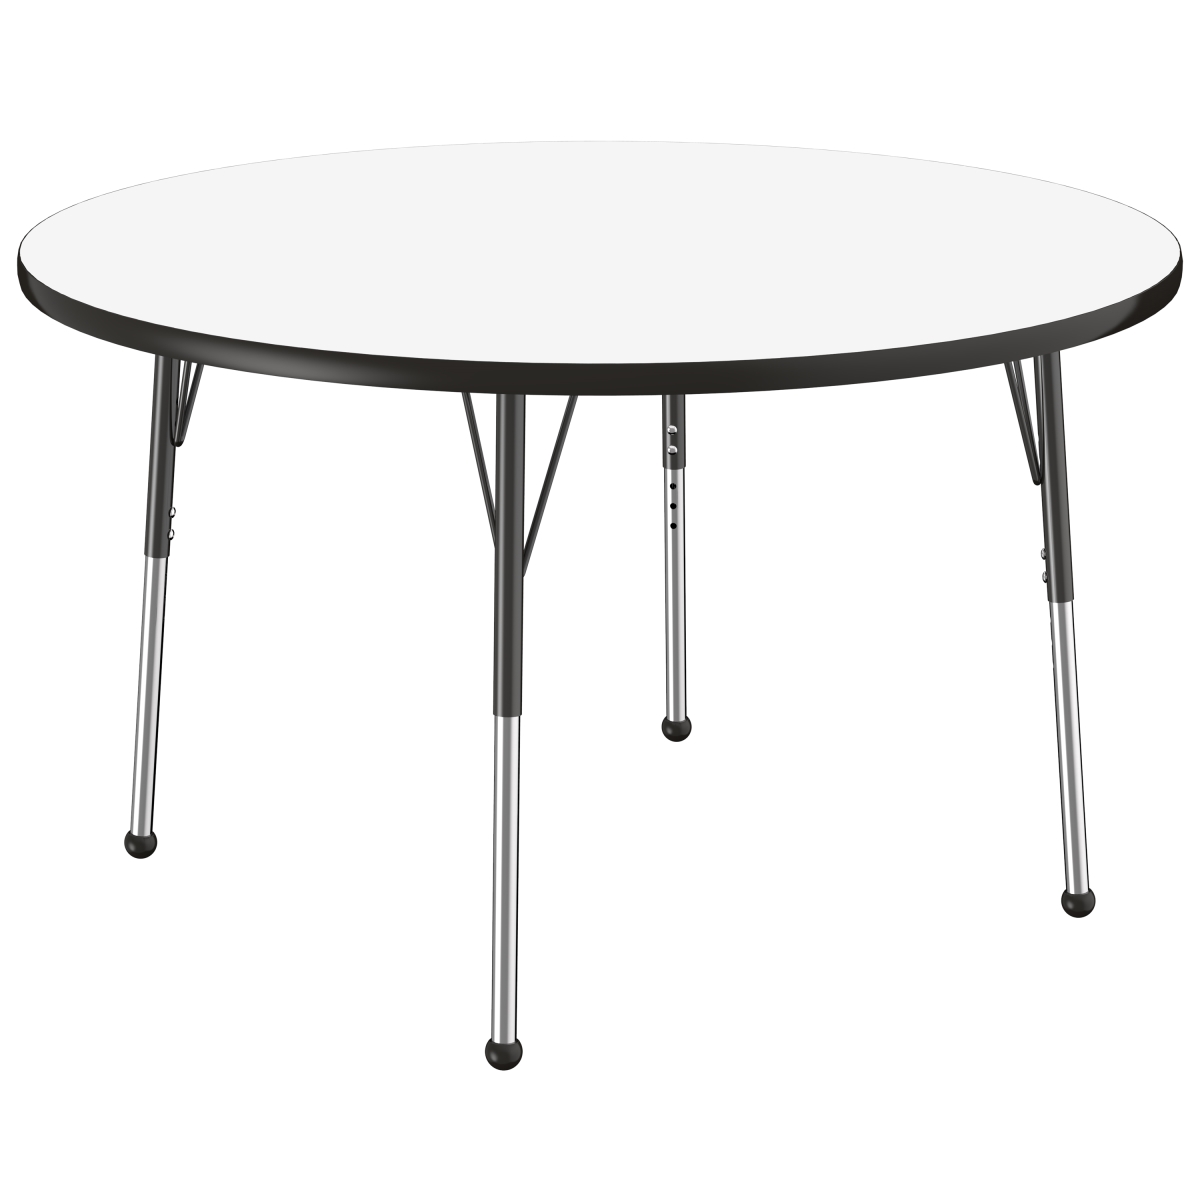 10197-debk 48 In. Round Dry-erase Adjustable Activity Table With Standard Ball - Black